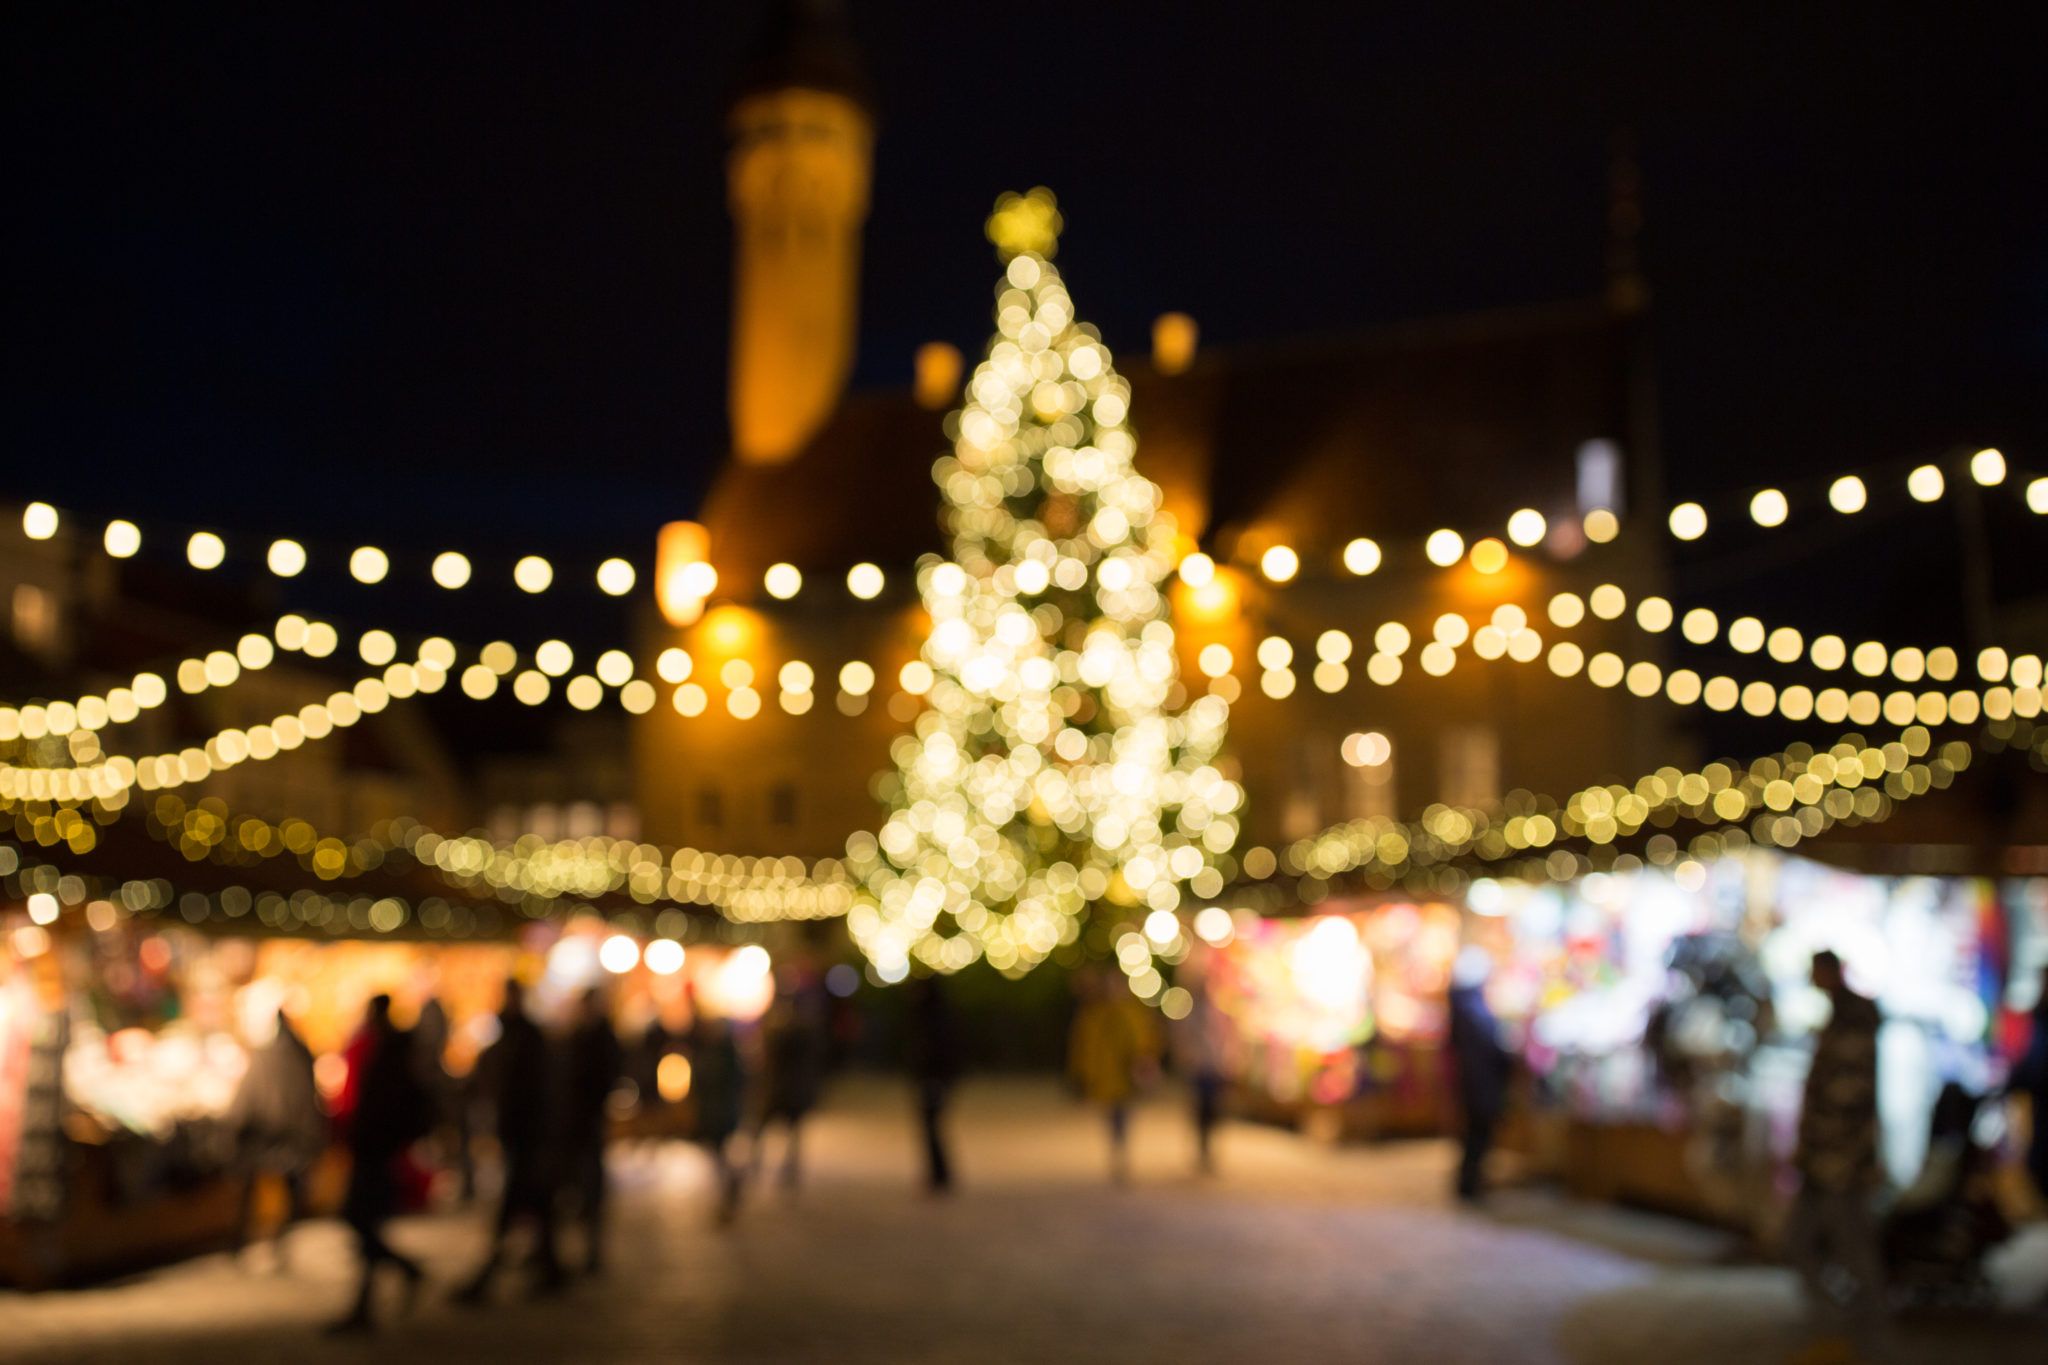 Get ready for some festive cheer and shopping at this Kildare Christmas Market